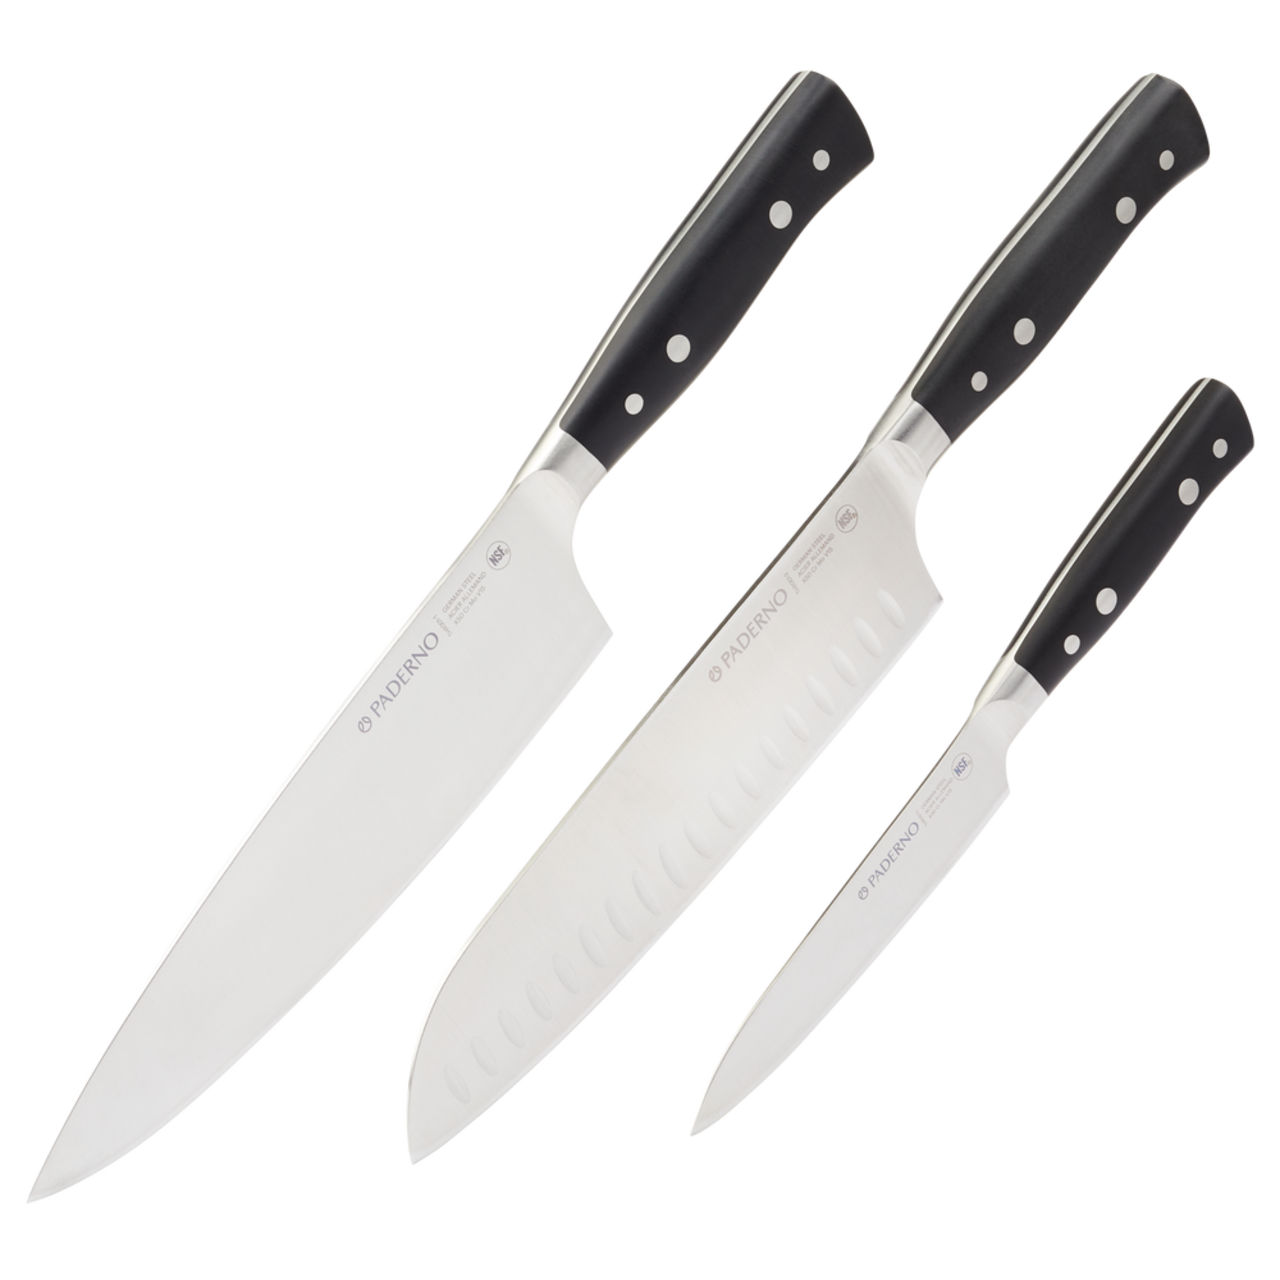 https://media-www.canadiantire.ca/product/living/kitchen/cutlery/1429372/paderno-montgomery-3pc-multi-pack-knife-set-24321587-33b6-4c04-954a-932a805468b8.png?imdensity=1&imwidth=640&impolicy=mZoom